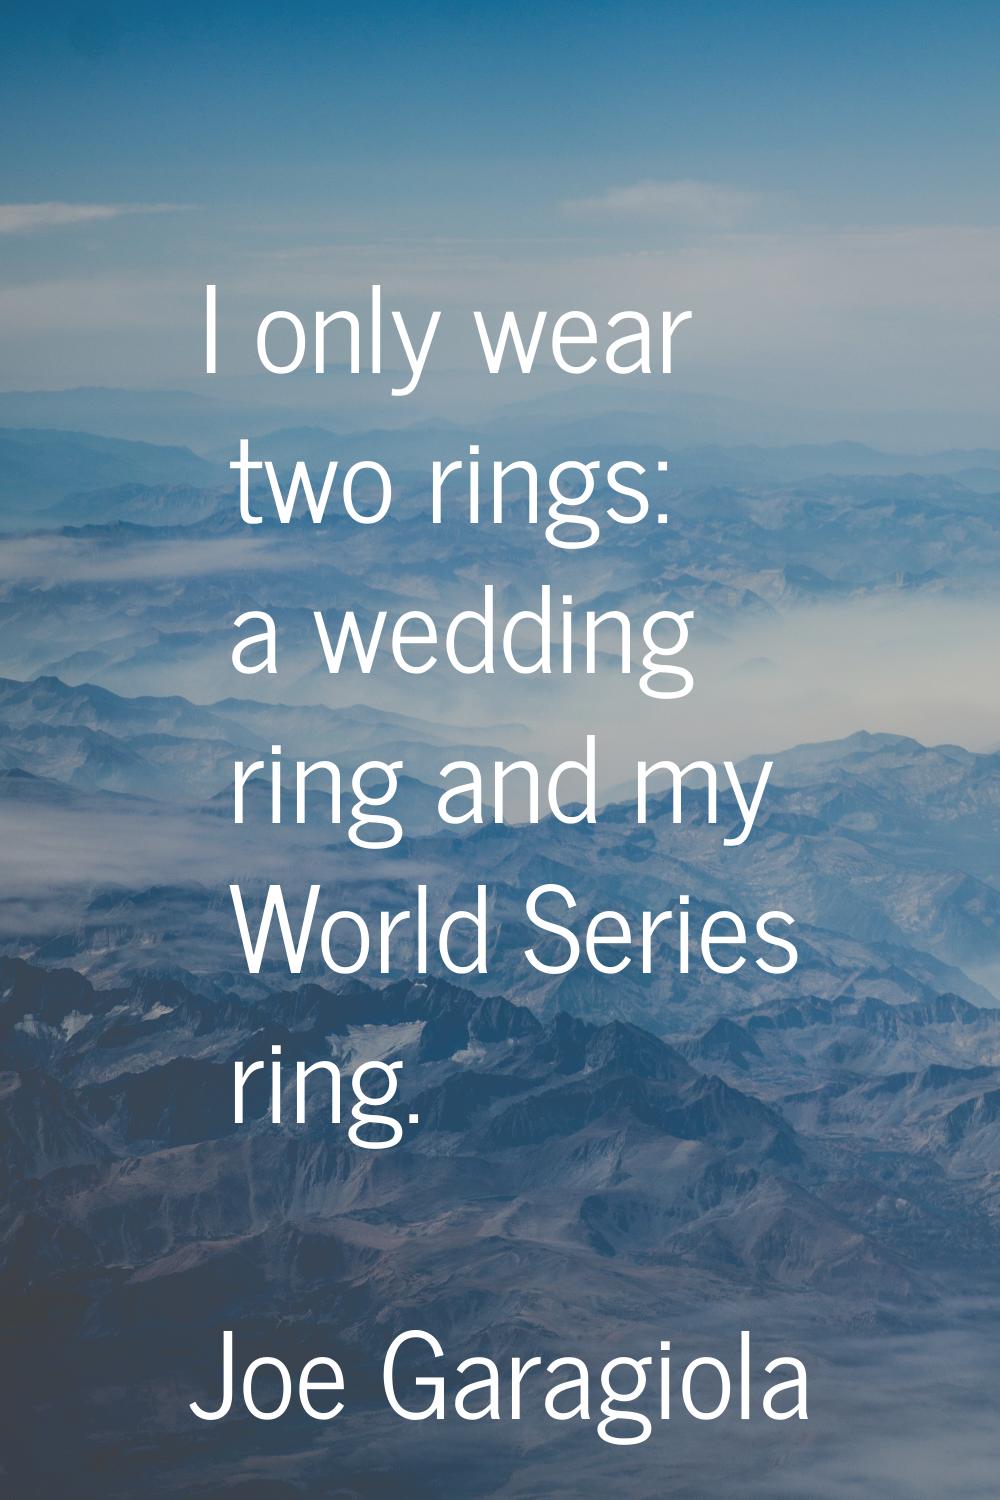 I only wear two rings: a wedding ring and my World Series ring.